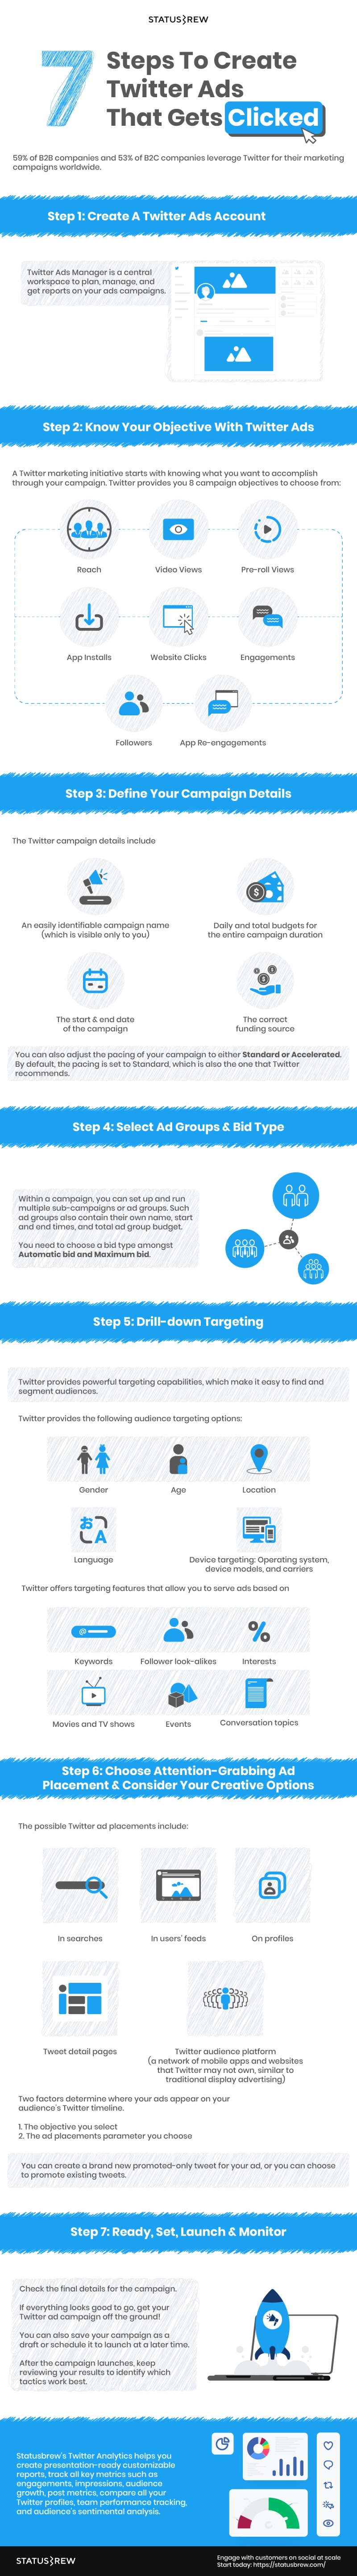 Engaging Twitter ads infographic